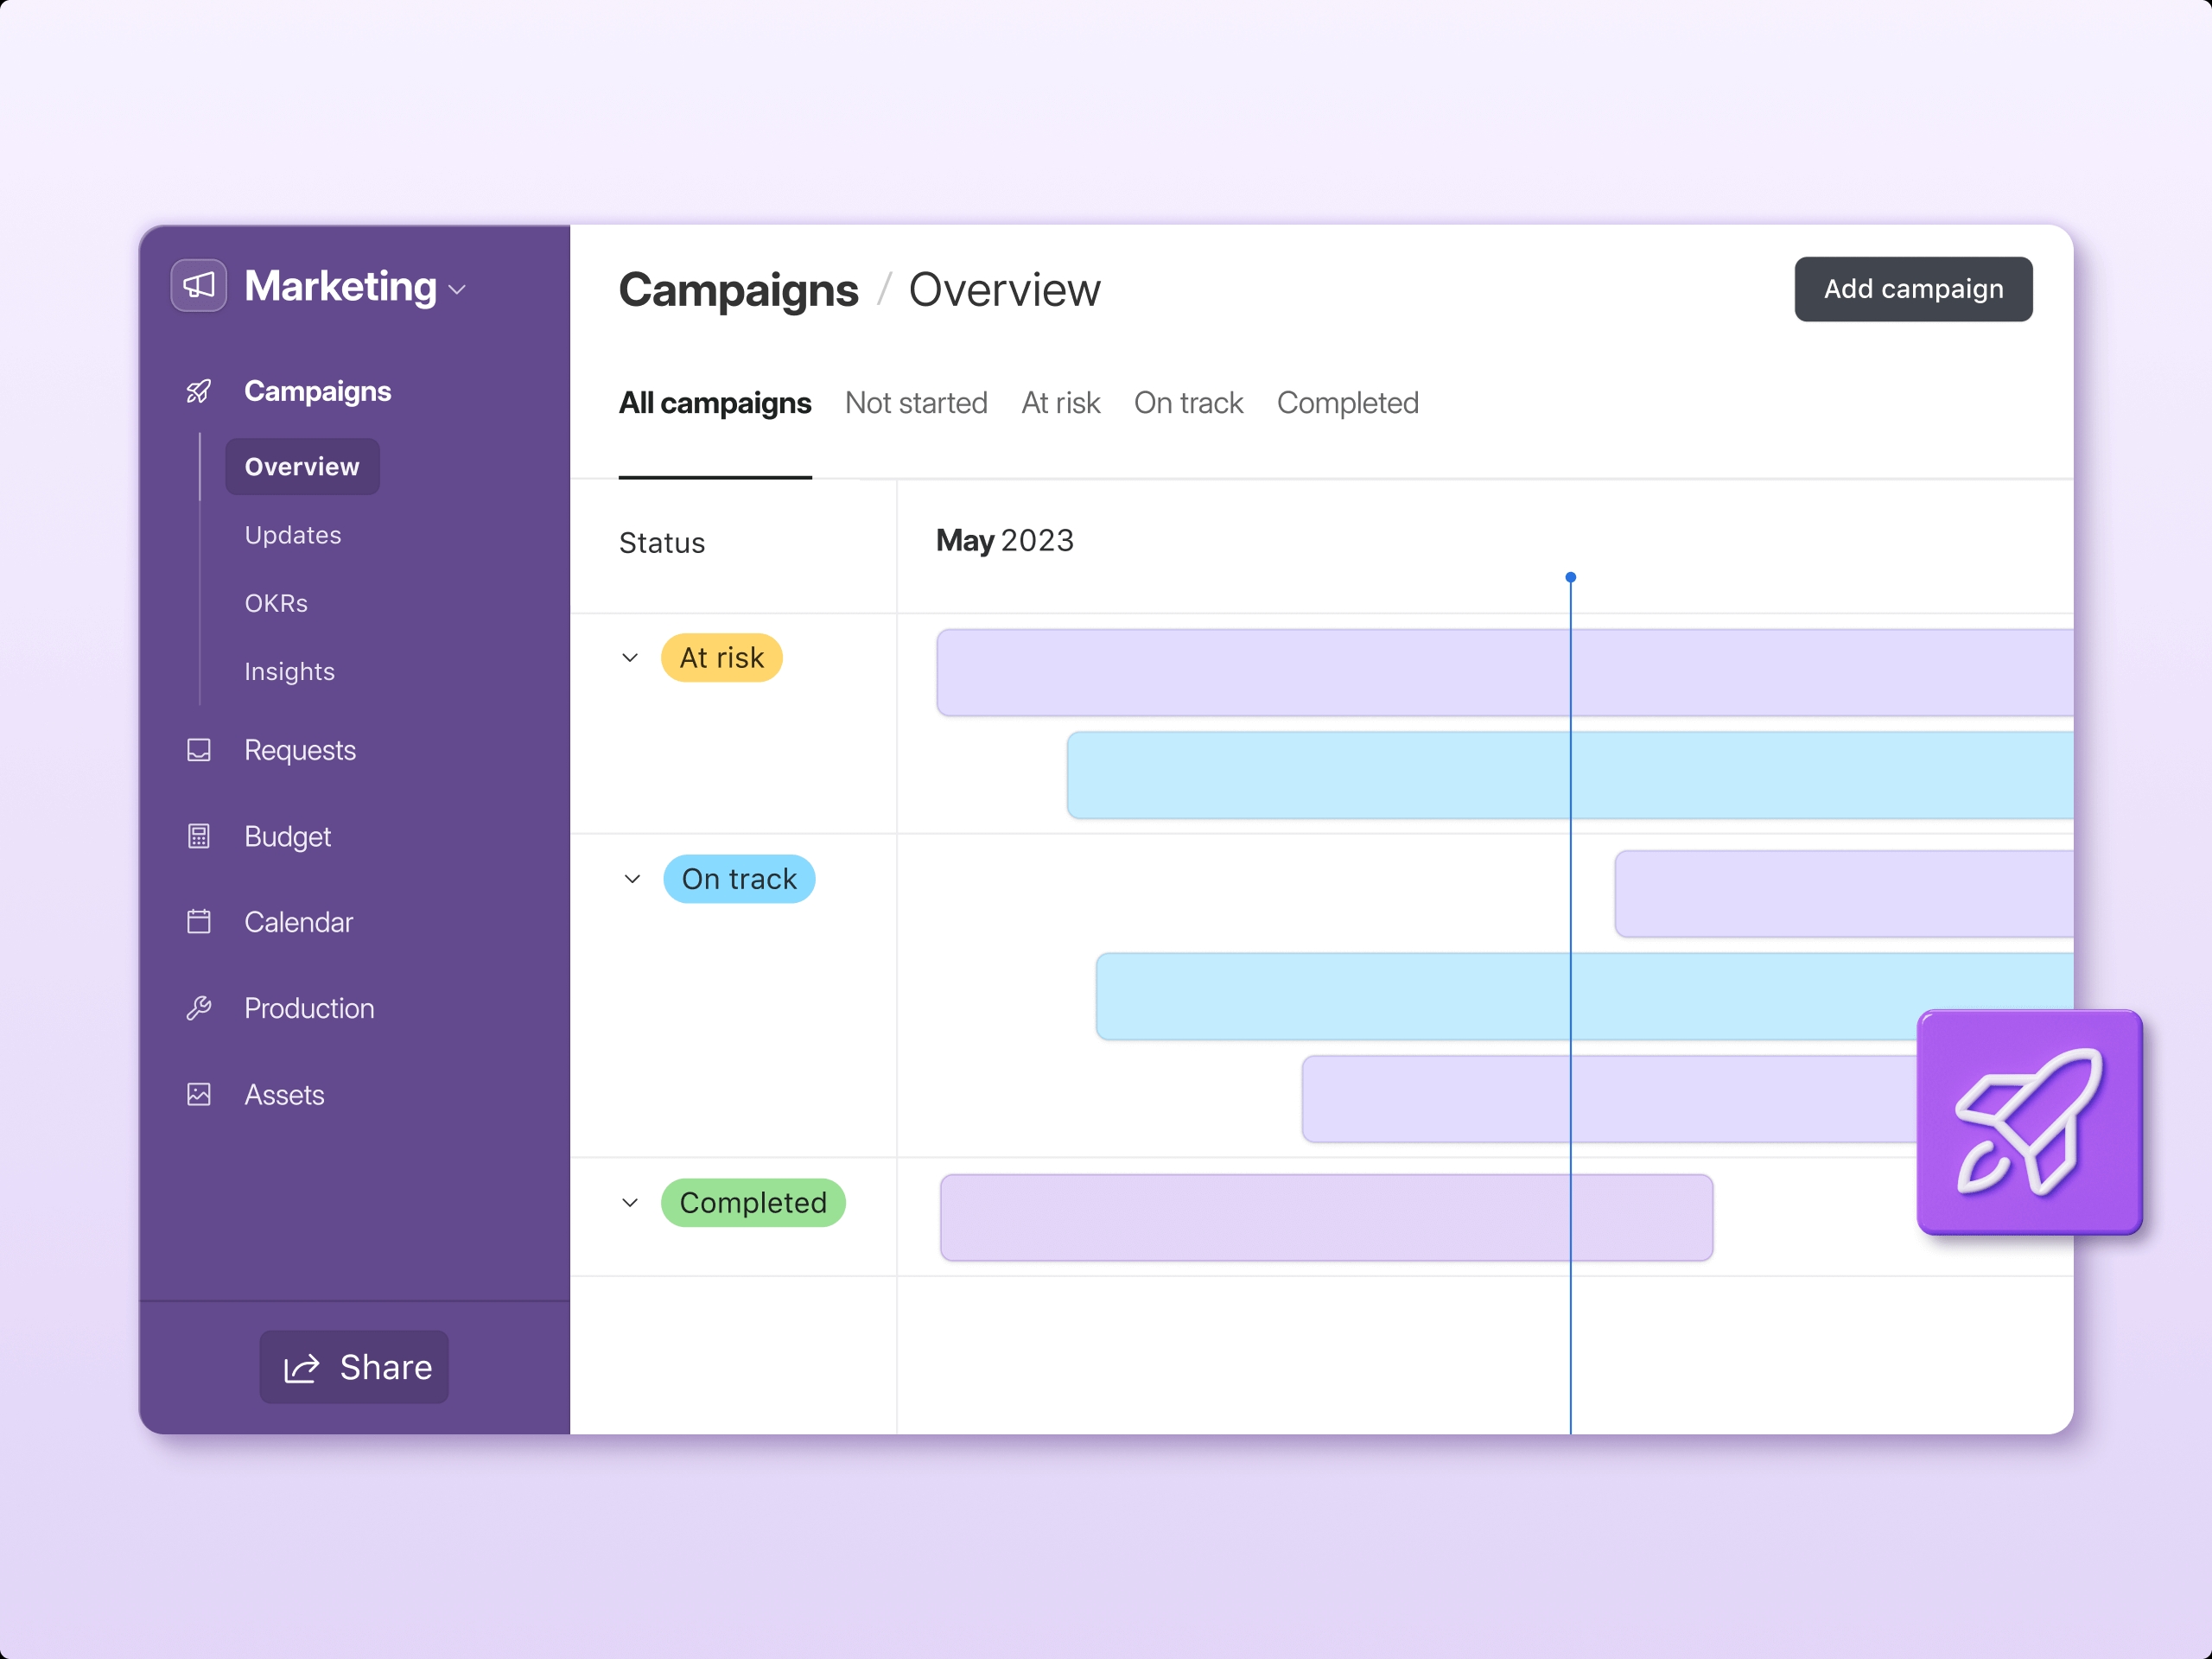 A Campaign overview interface in Airtable shows a calendar overlaid with tasks and their statuses